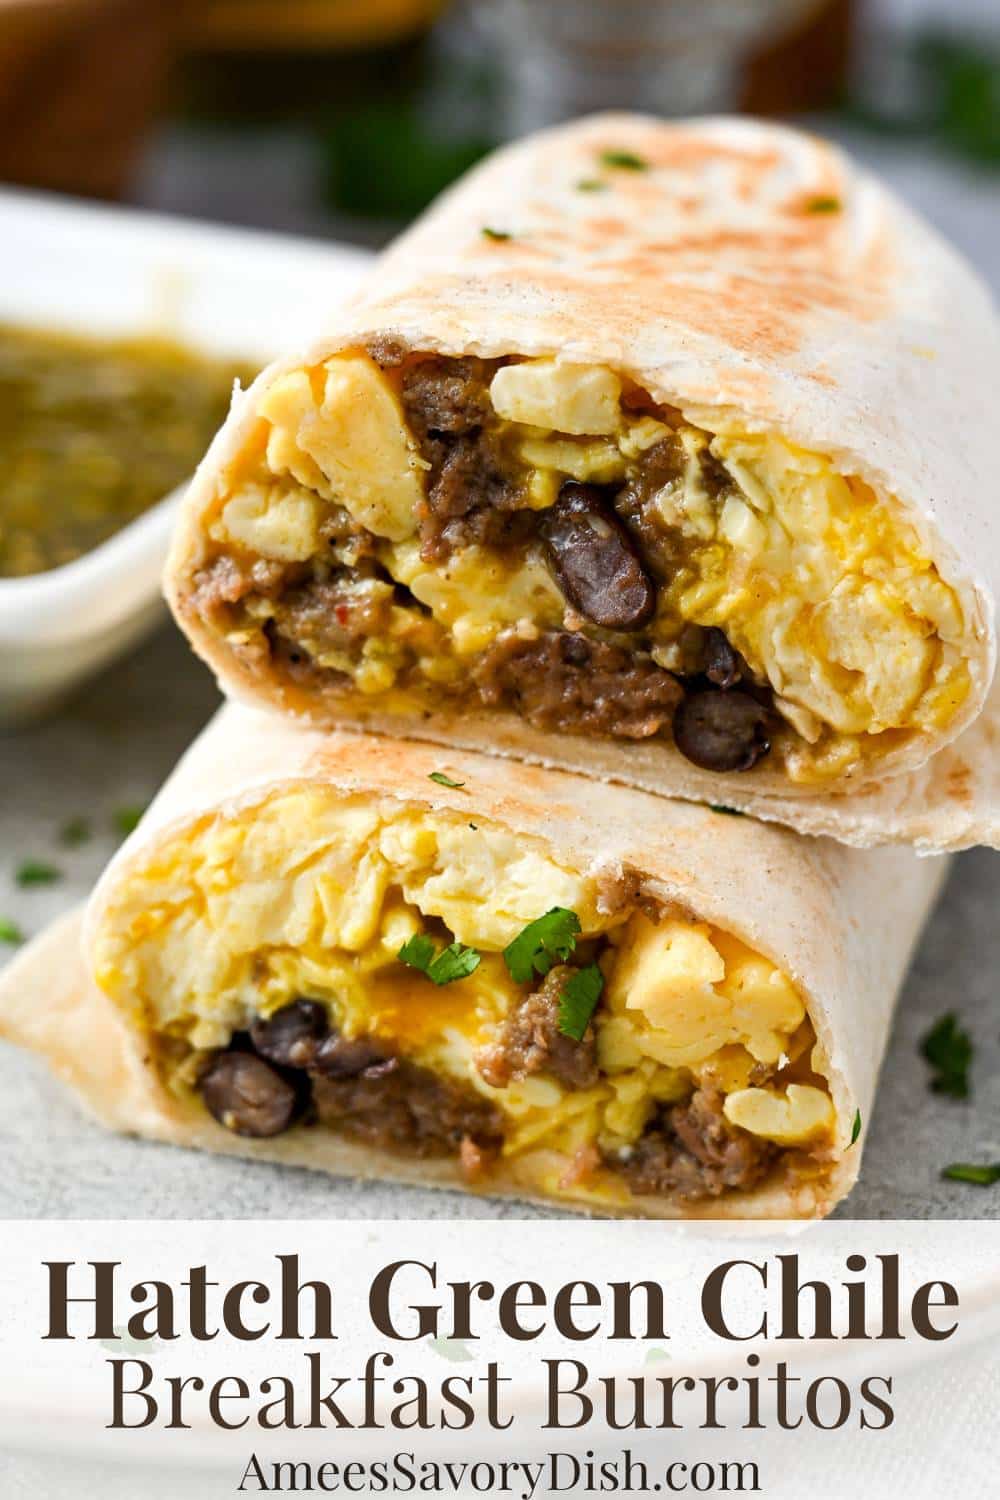 These green chile breakfast burritos feature lean sausage, scrambled eggs, cheese, black beans, and zesty hatch green chiles wrapped in low-carb tortillas. They’re easy to make and freezer-friendly. via @Ameessavorydish